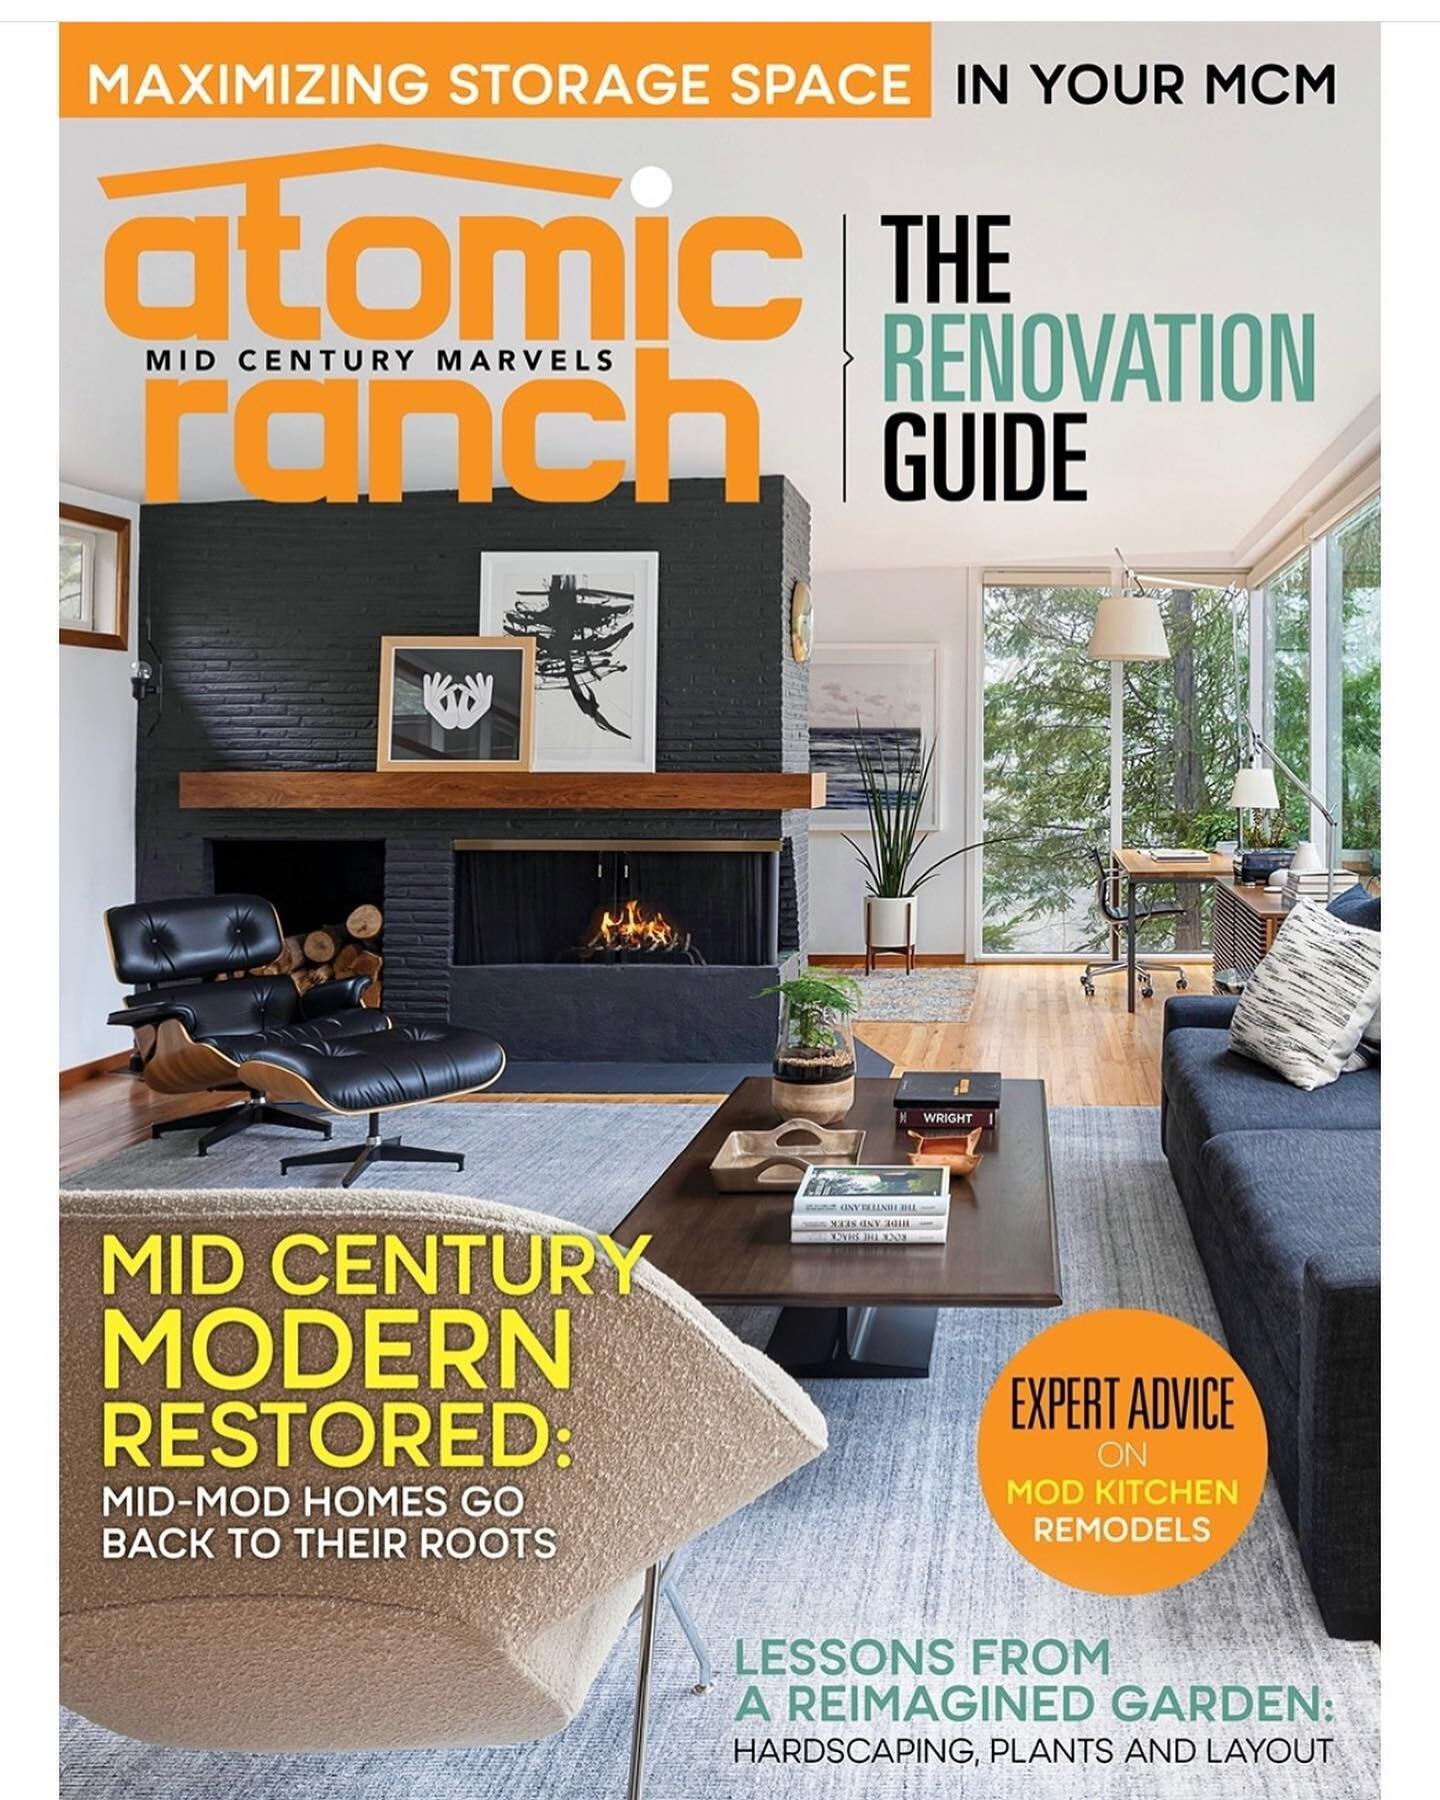 I&rsquo;m thrilled my photos of the Boomerang house by GSW architects made it into and onto the cover of Atomic Ranch. #atomicranch #midcenturymodern #architecturephotography #midcentury